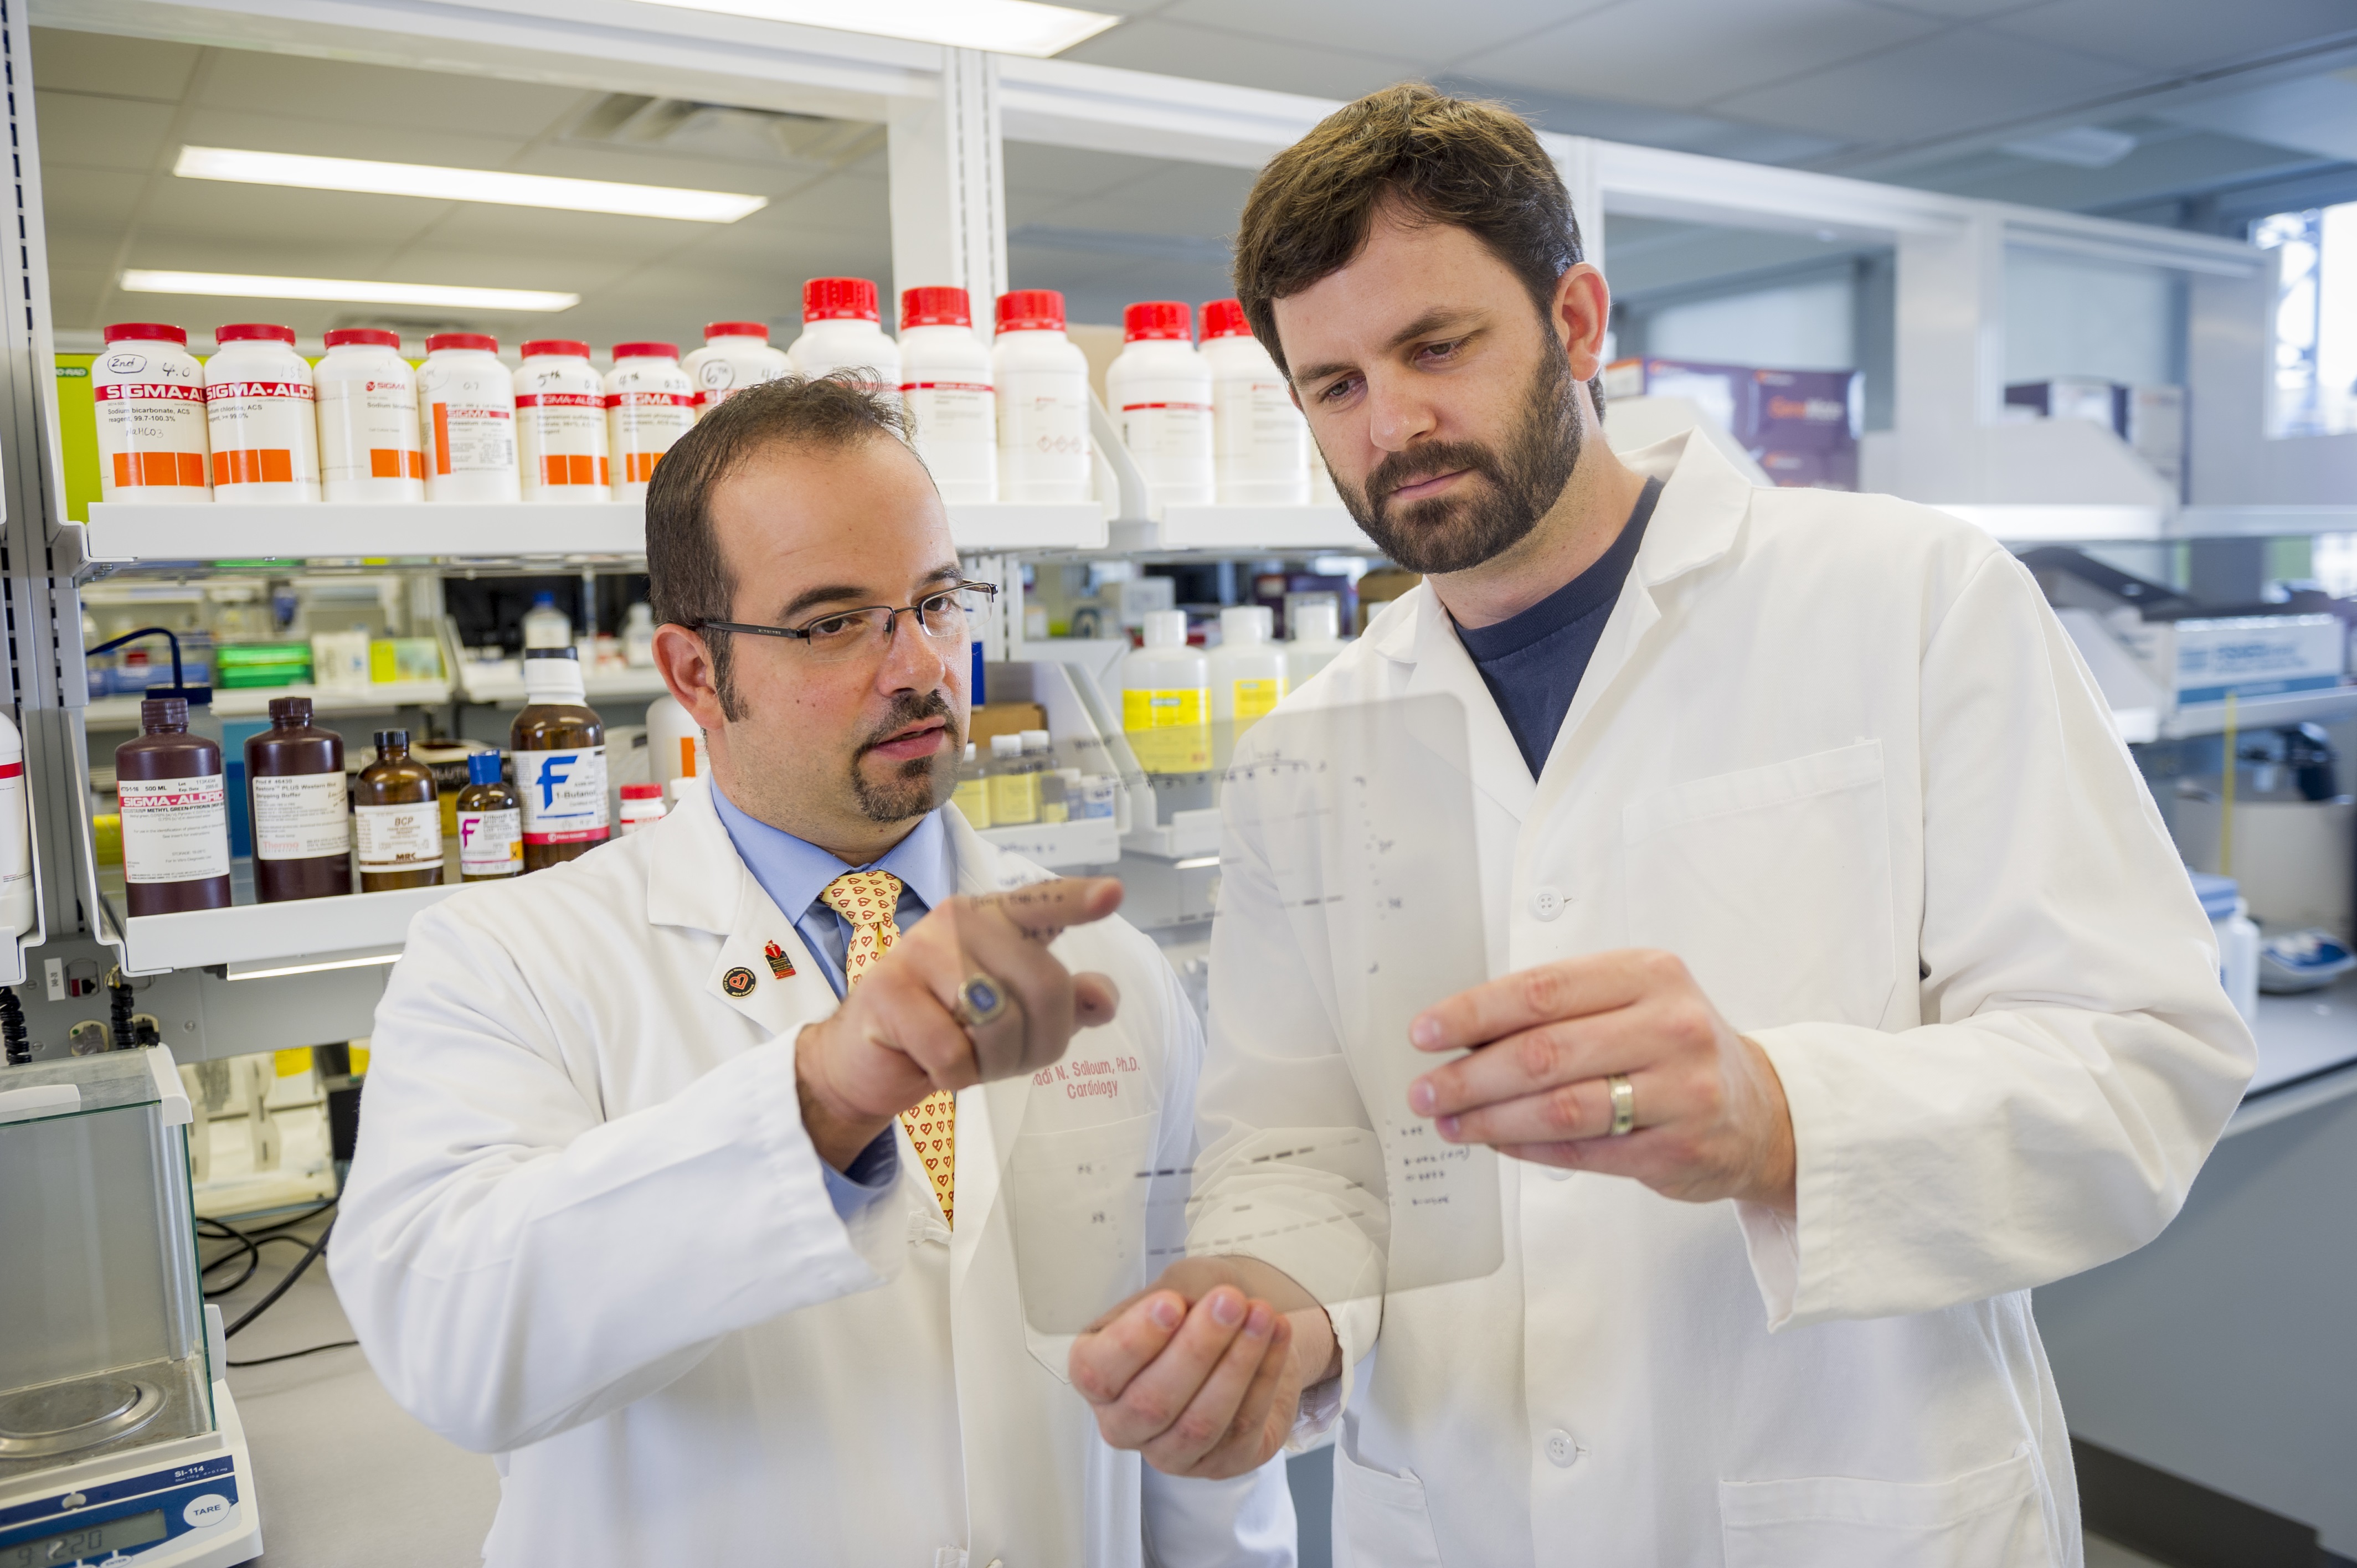 Fadi Salloum, Ph.D., and former graduate student David Durrant, Ph.D., in a lab reviewing research